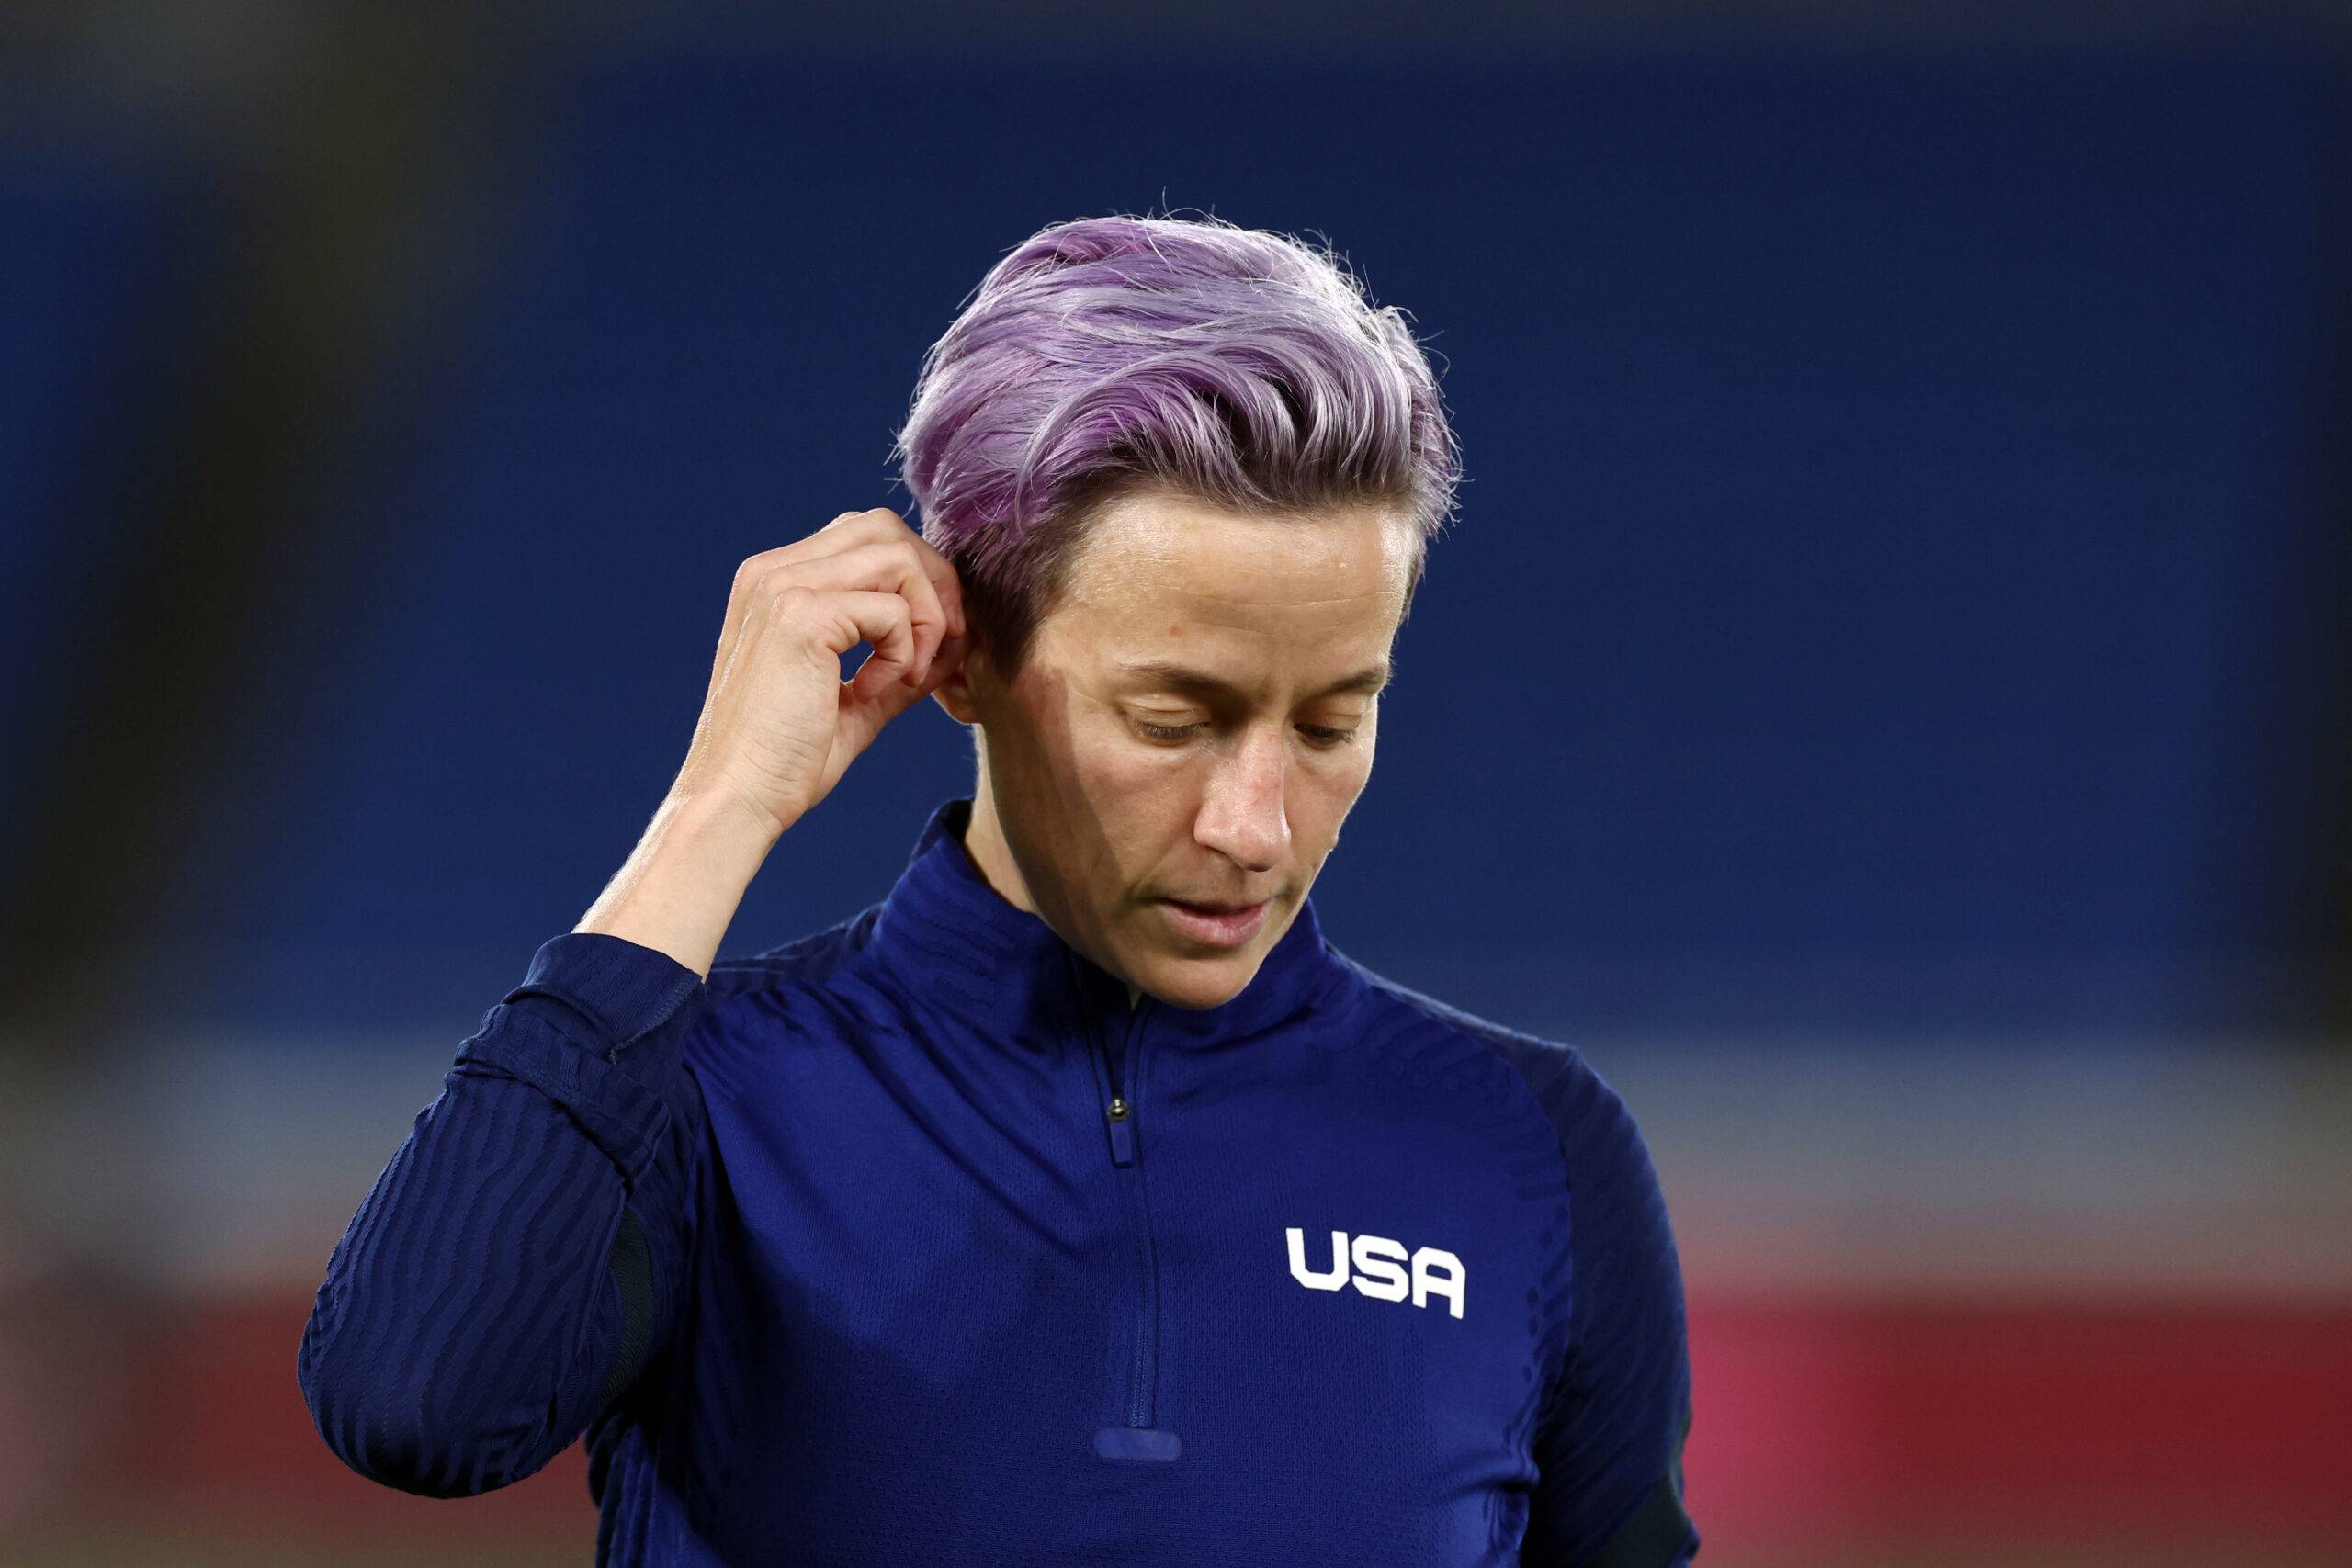 Megan Rapinoe for the USA during an Olympic football match